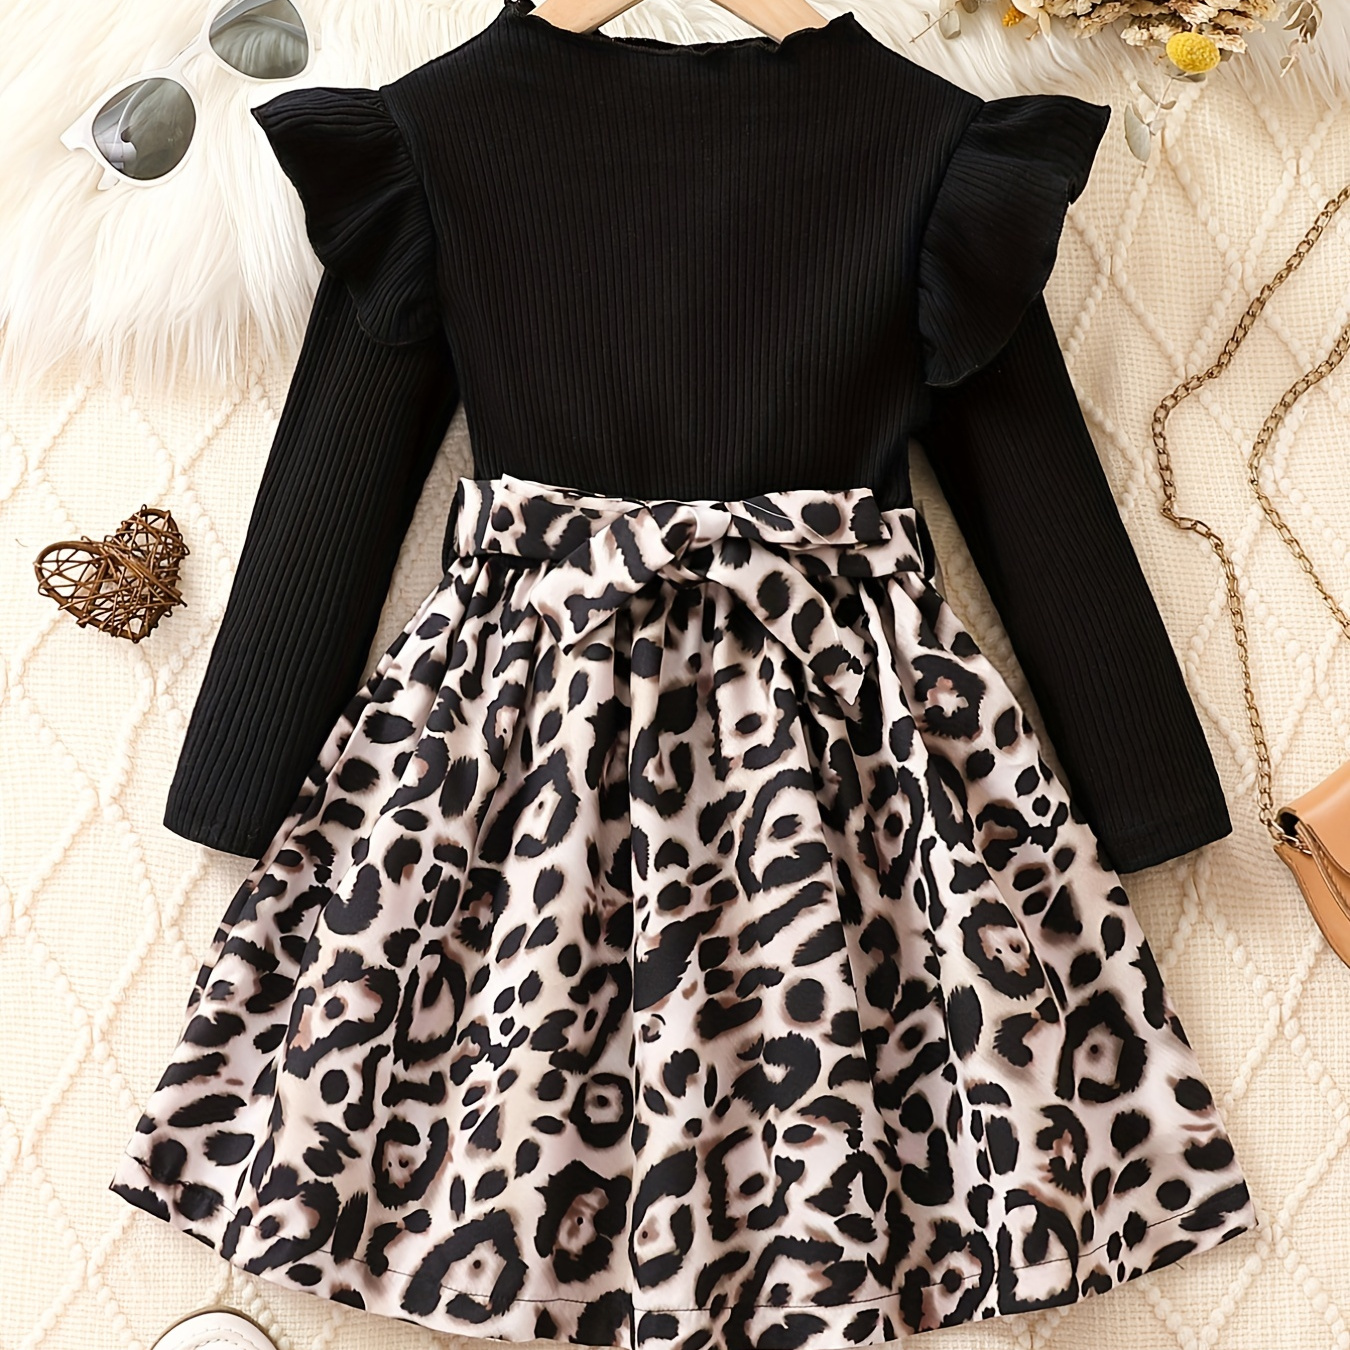 

Girl's Leopard Print Stitching Rib Knit Comfort Fit Long Sleeve Dress For Party Going Out, Kid's Dresses Gift Idea